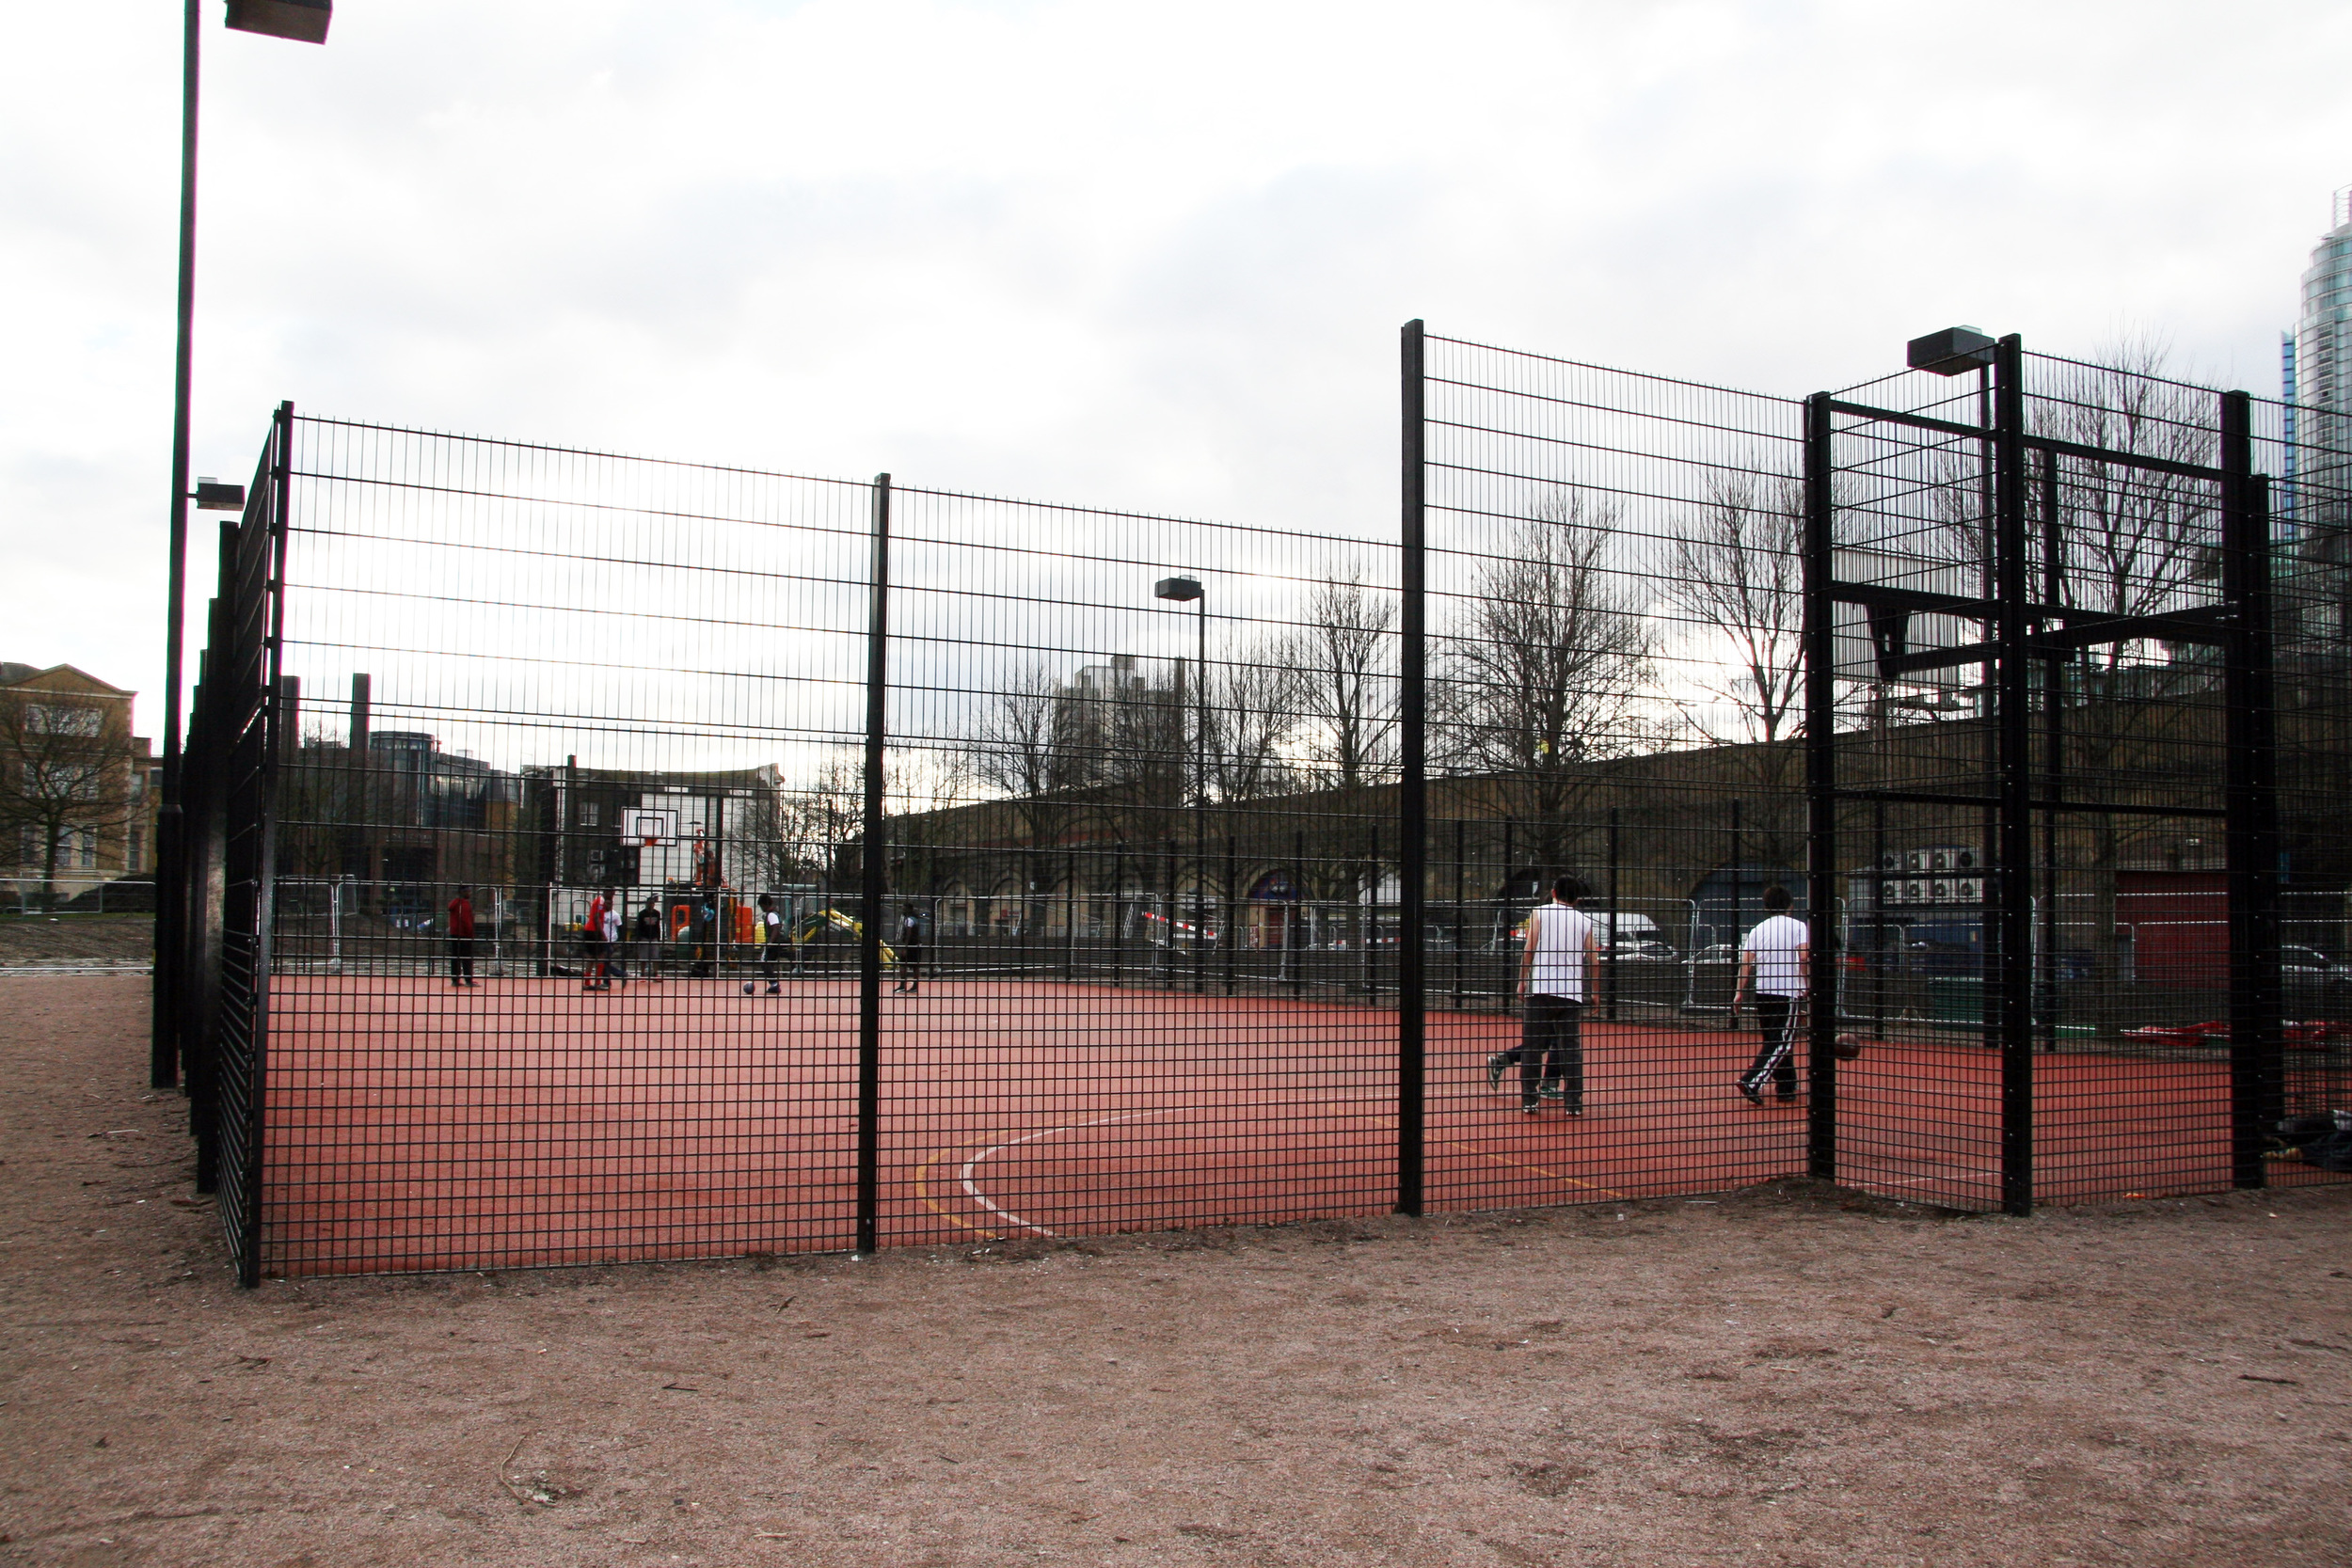 The Multi Use Games Area (MUGA) which opened in 2010